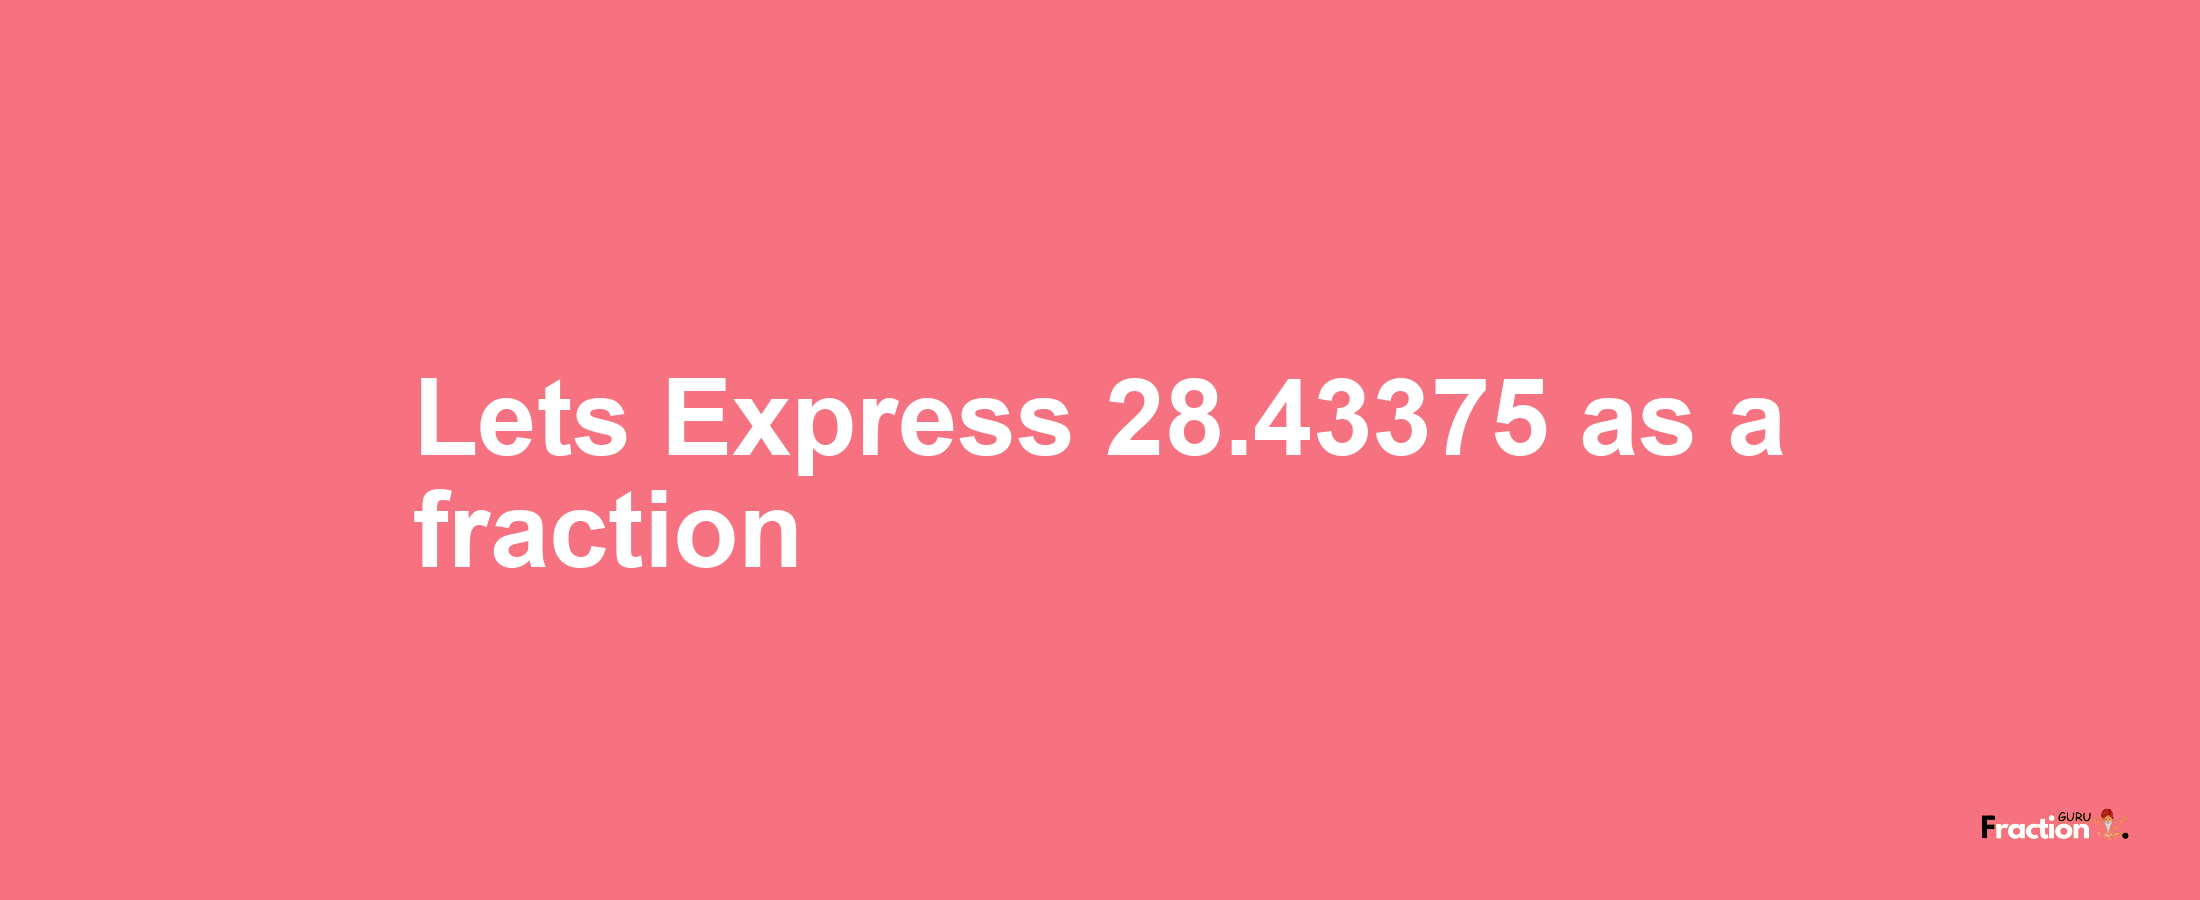 Lets Express 28.43375 as afraction